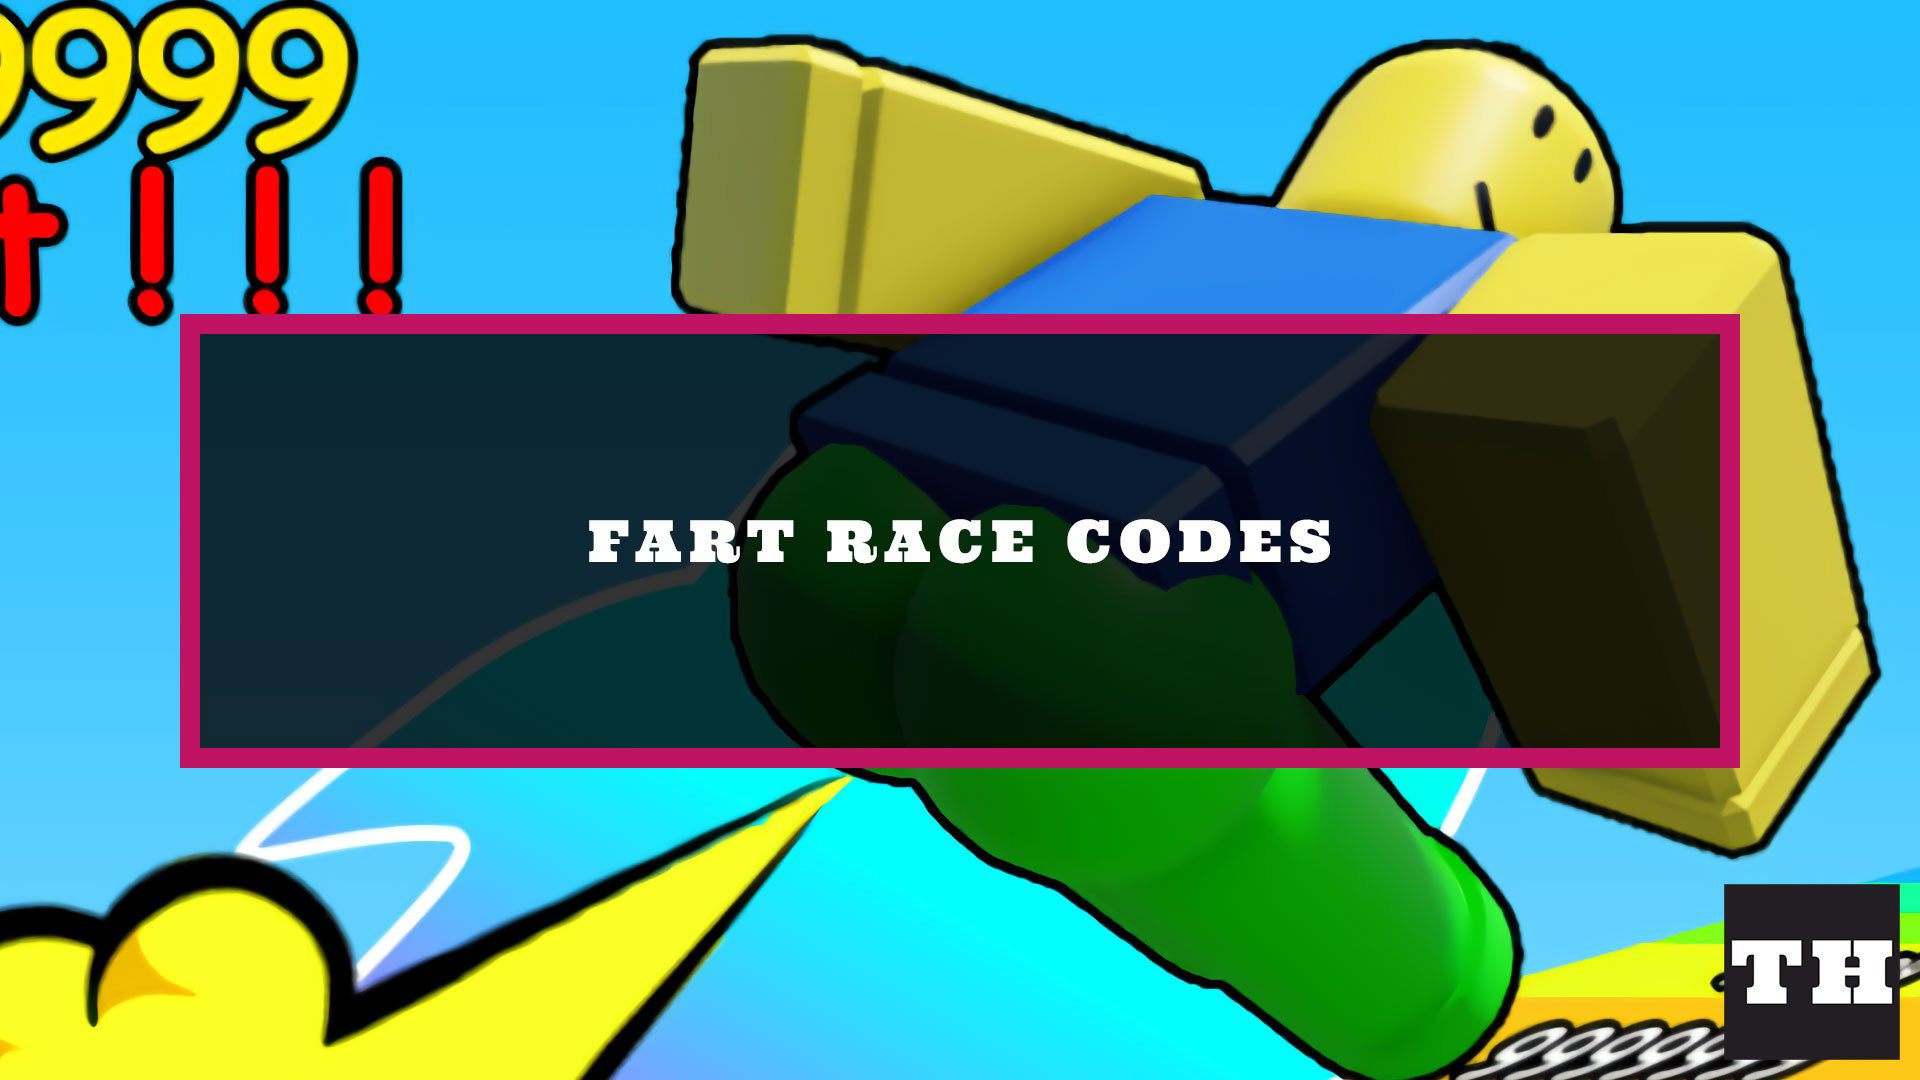 NEW* ALL WORKING CODES FOR Dragon Race IN JUNE 2023! ROBLOX Dragon Race  CODES 